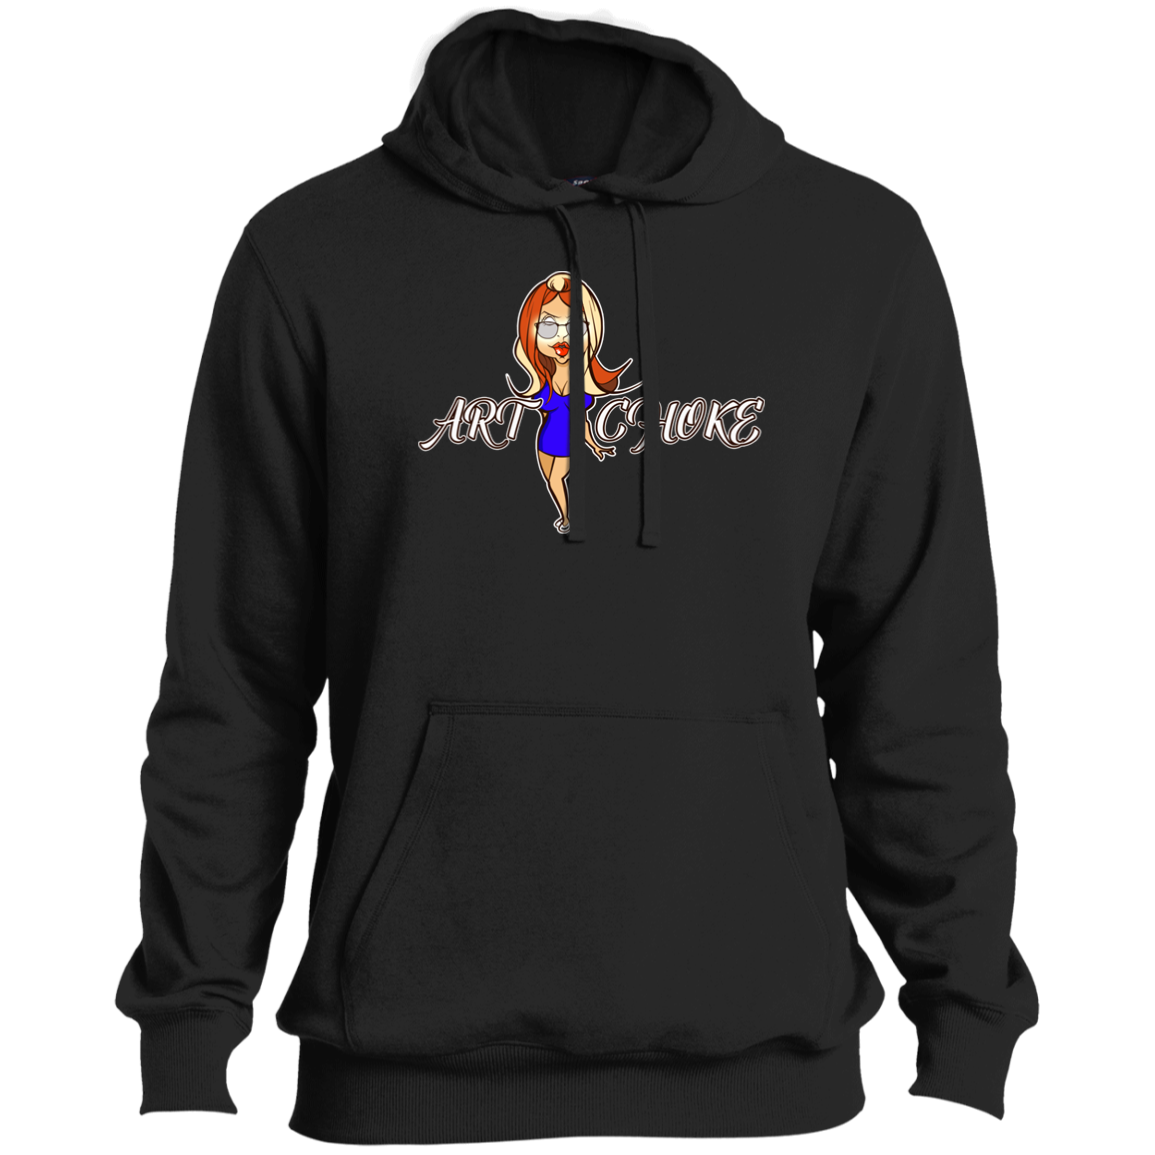 ArtichokeUSA Character and Font Design #2. Friends and Fam. Let’s Create Your Own Design Today.Ultra Soft Hoodie